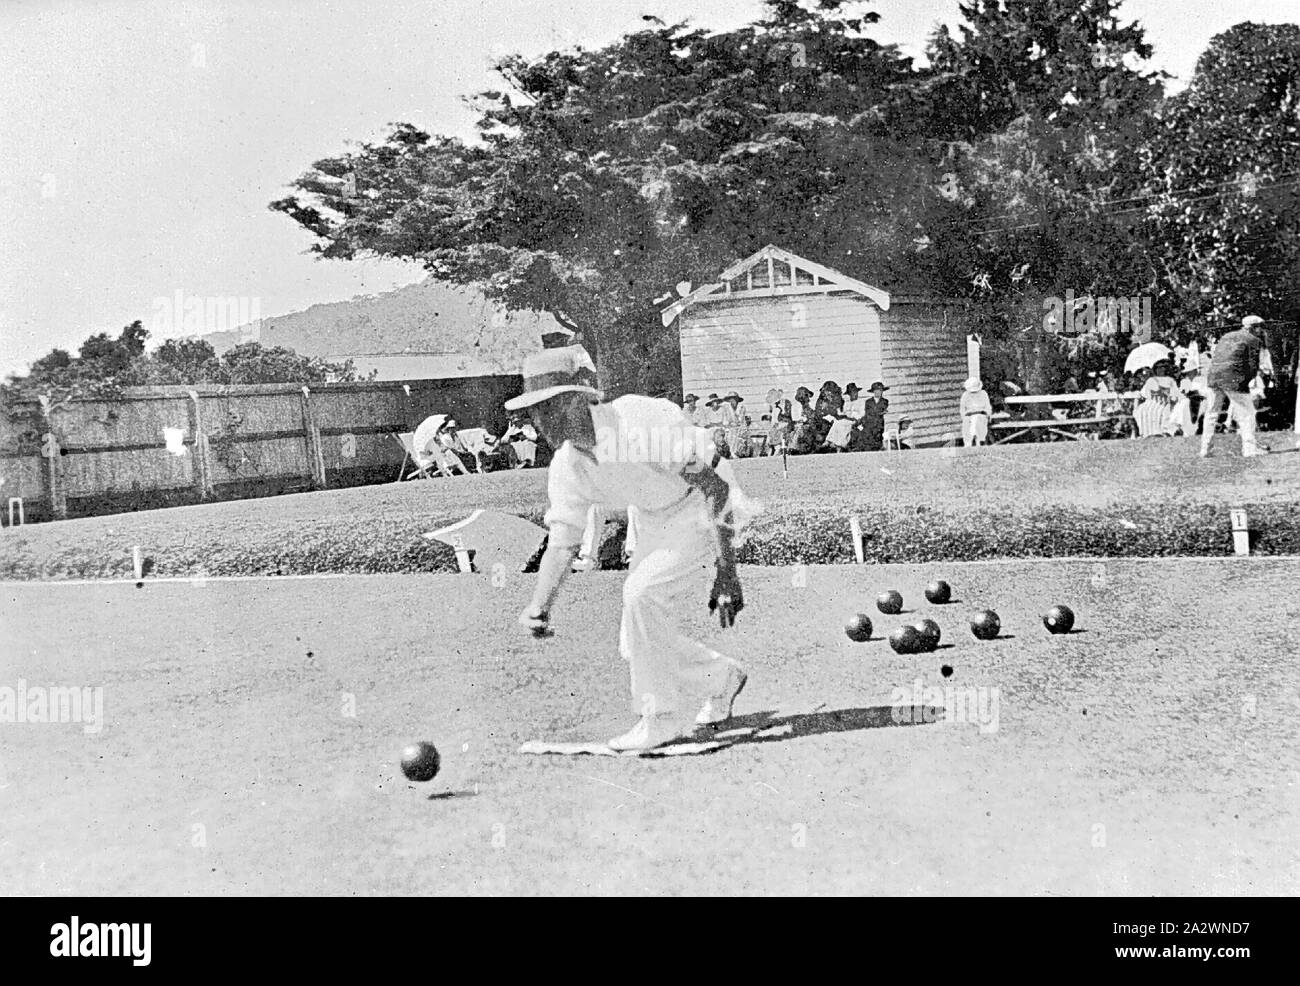 Negative - Man Playing Bowls at 'Erskine House', Lorne, Victoria, 1920, A man playing bowls at 'Erskine House'. A small group of people watch in the background Stock Photo